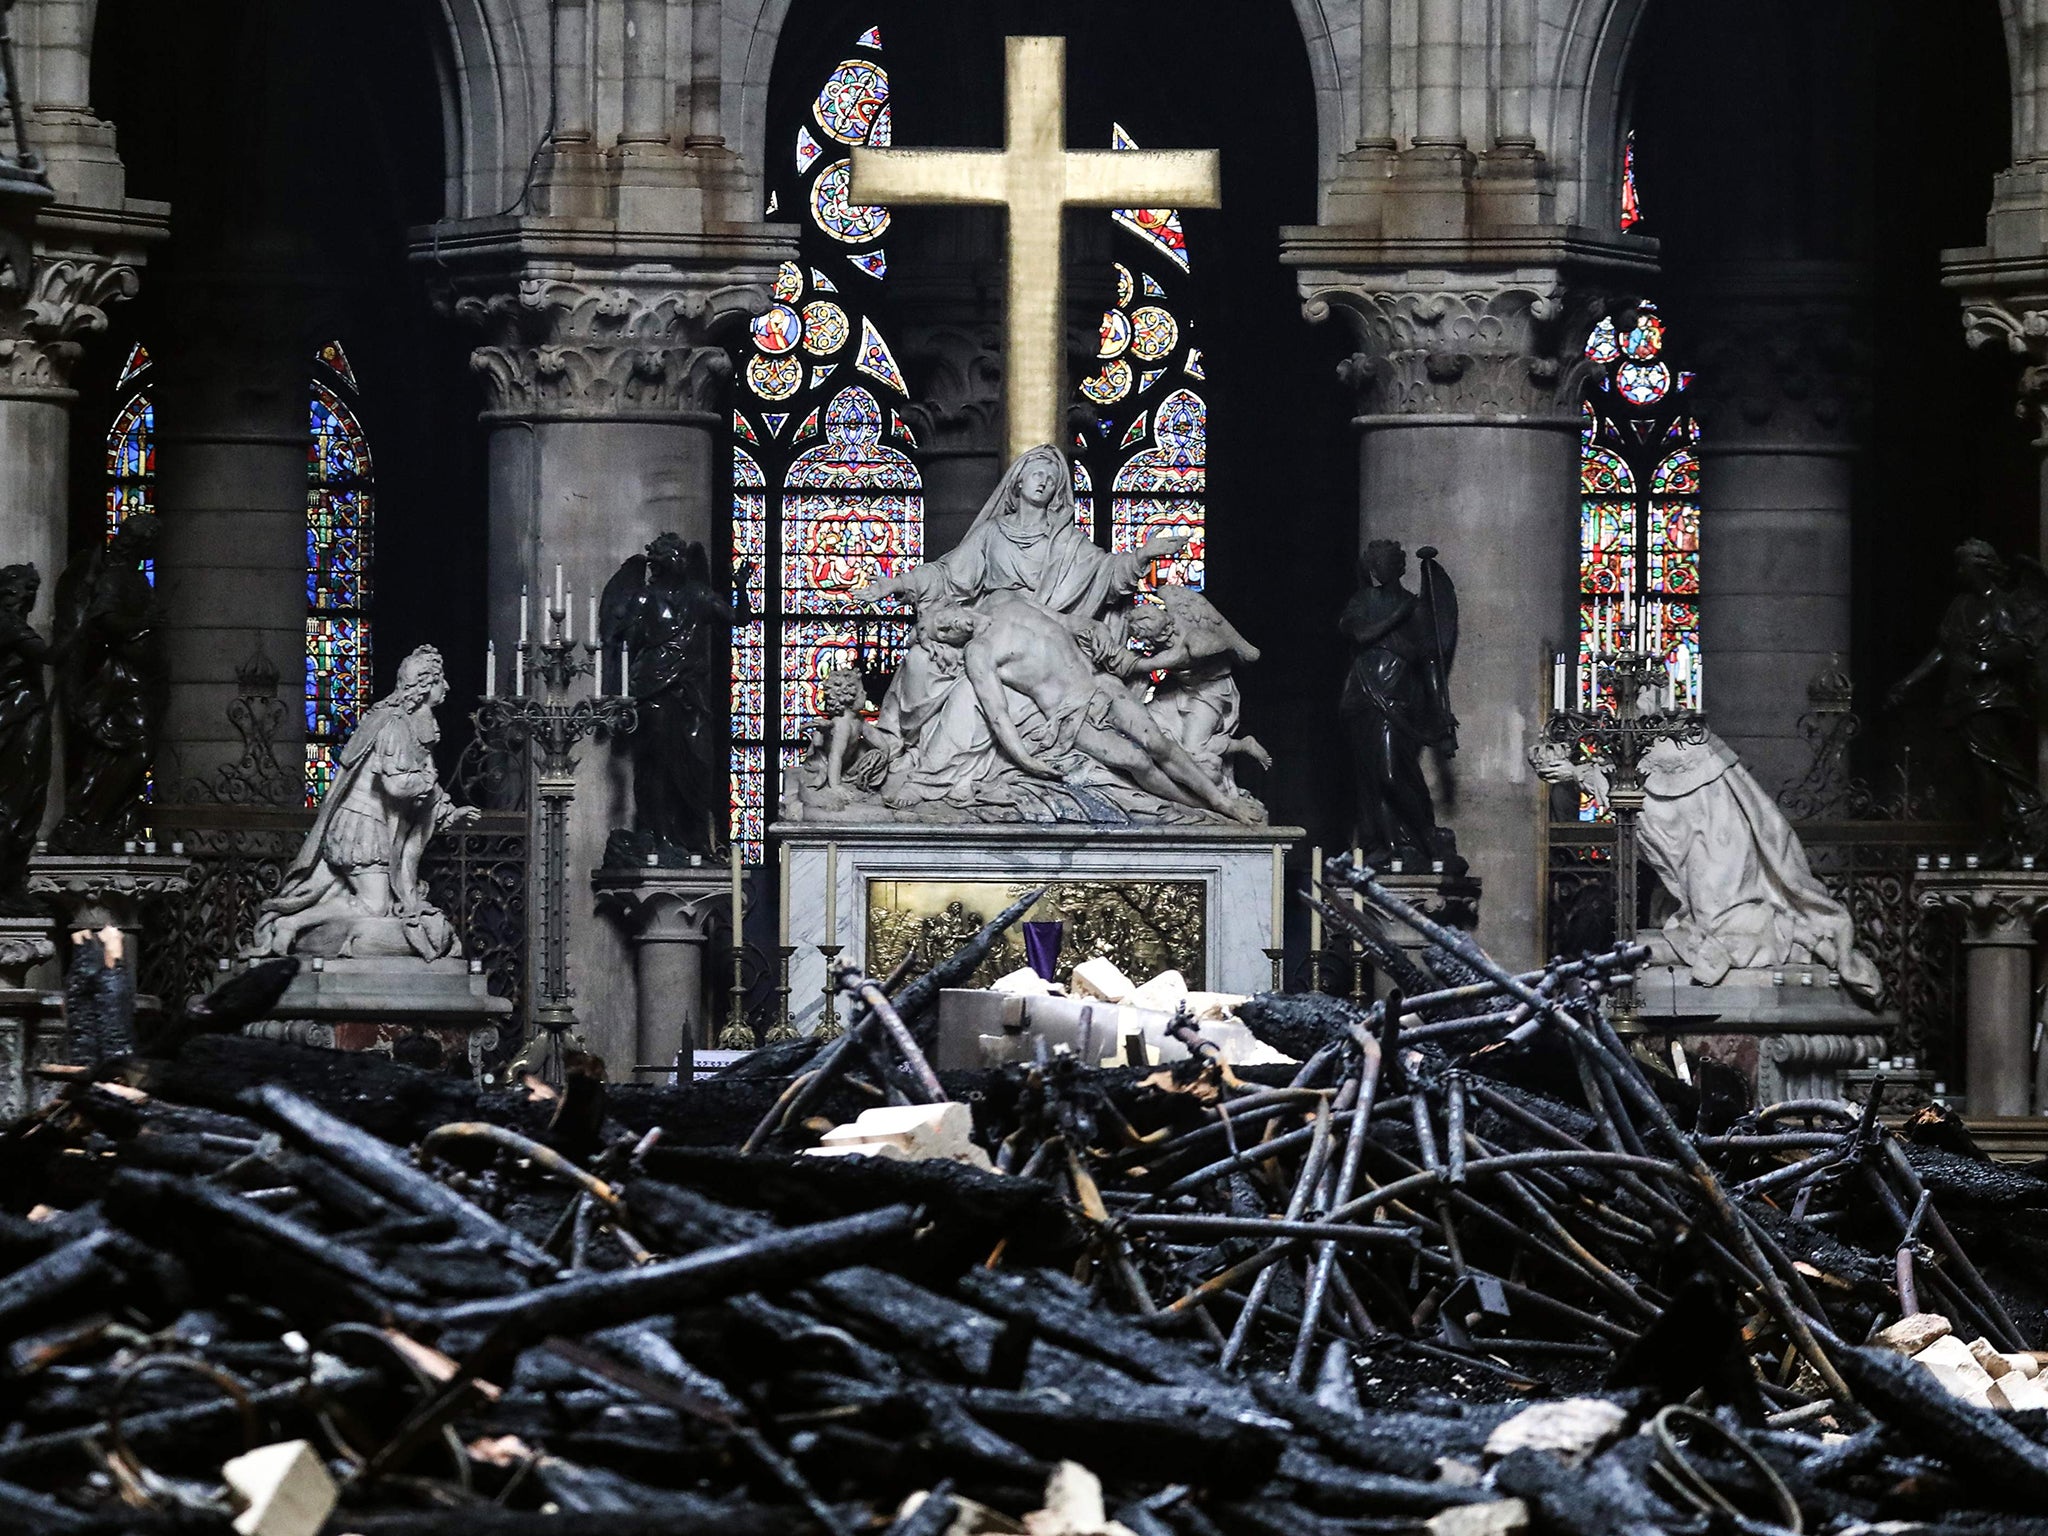 The interior of the cathedral the day after fire devastated the building